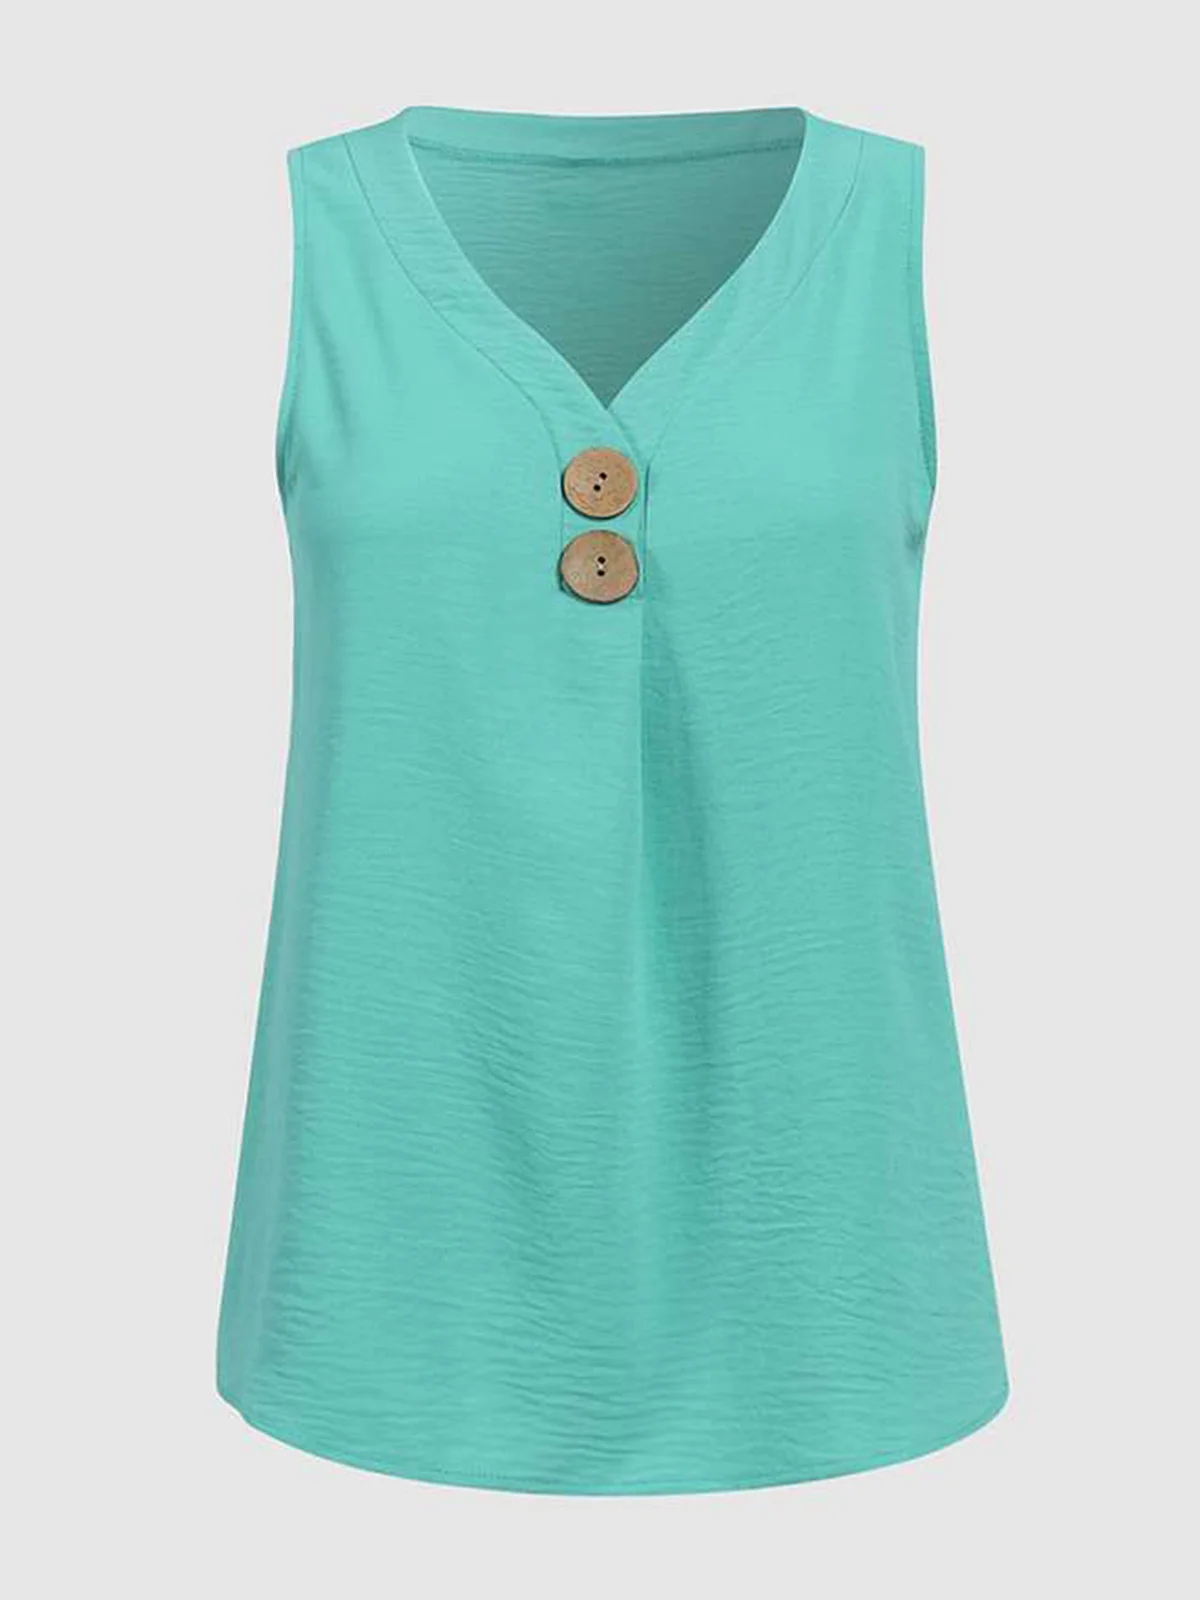 Buttoned Casual V Neck Plain Tank Top